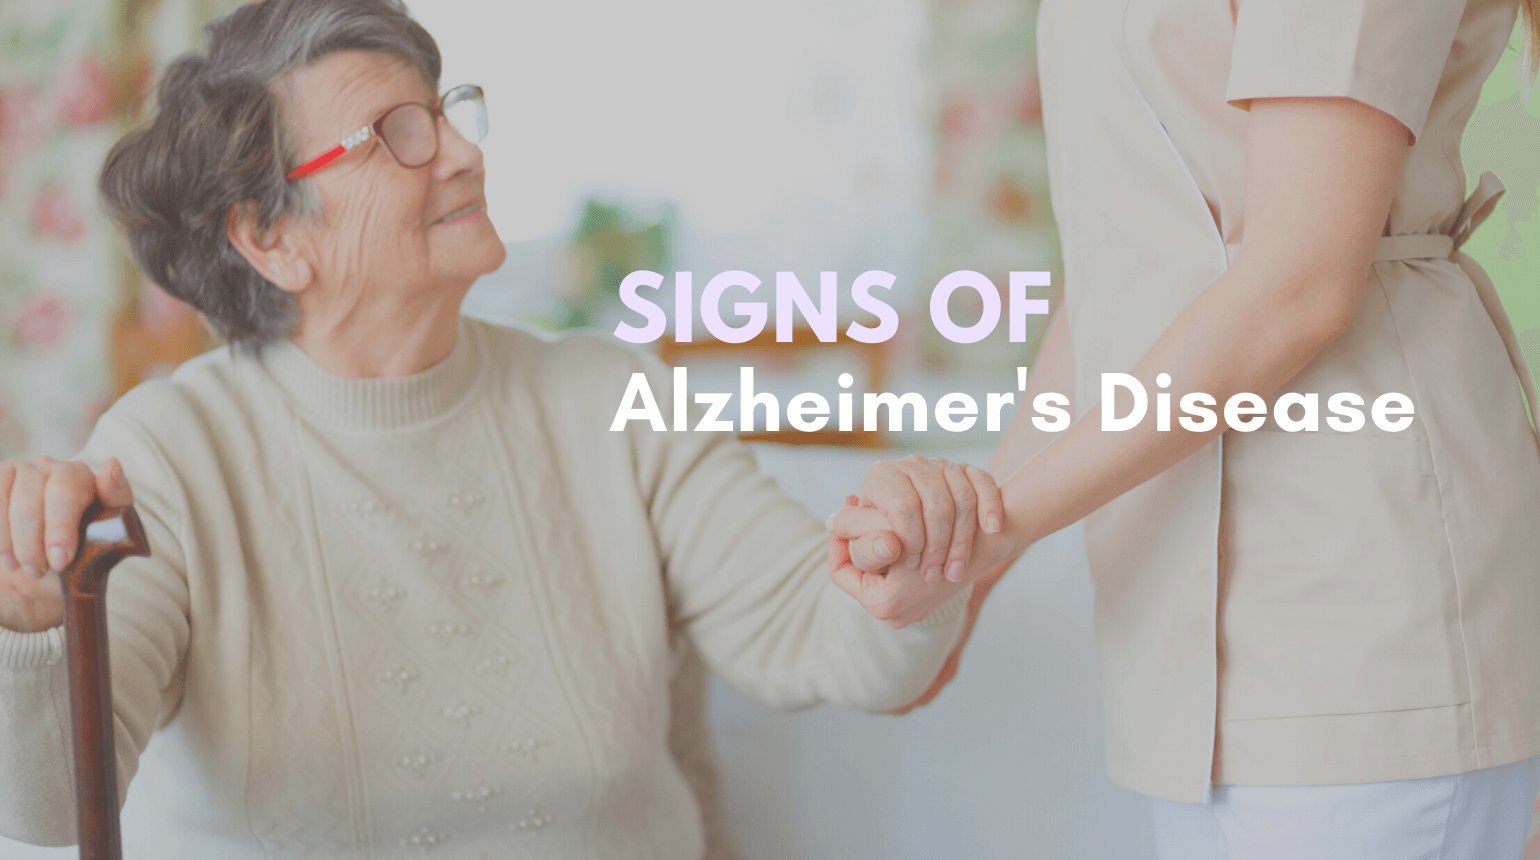 Does the brain change before symptoms of alzheimer's appear?